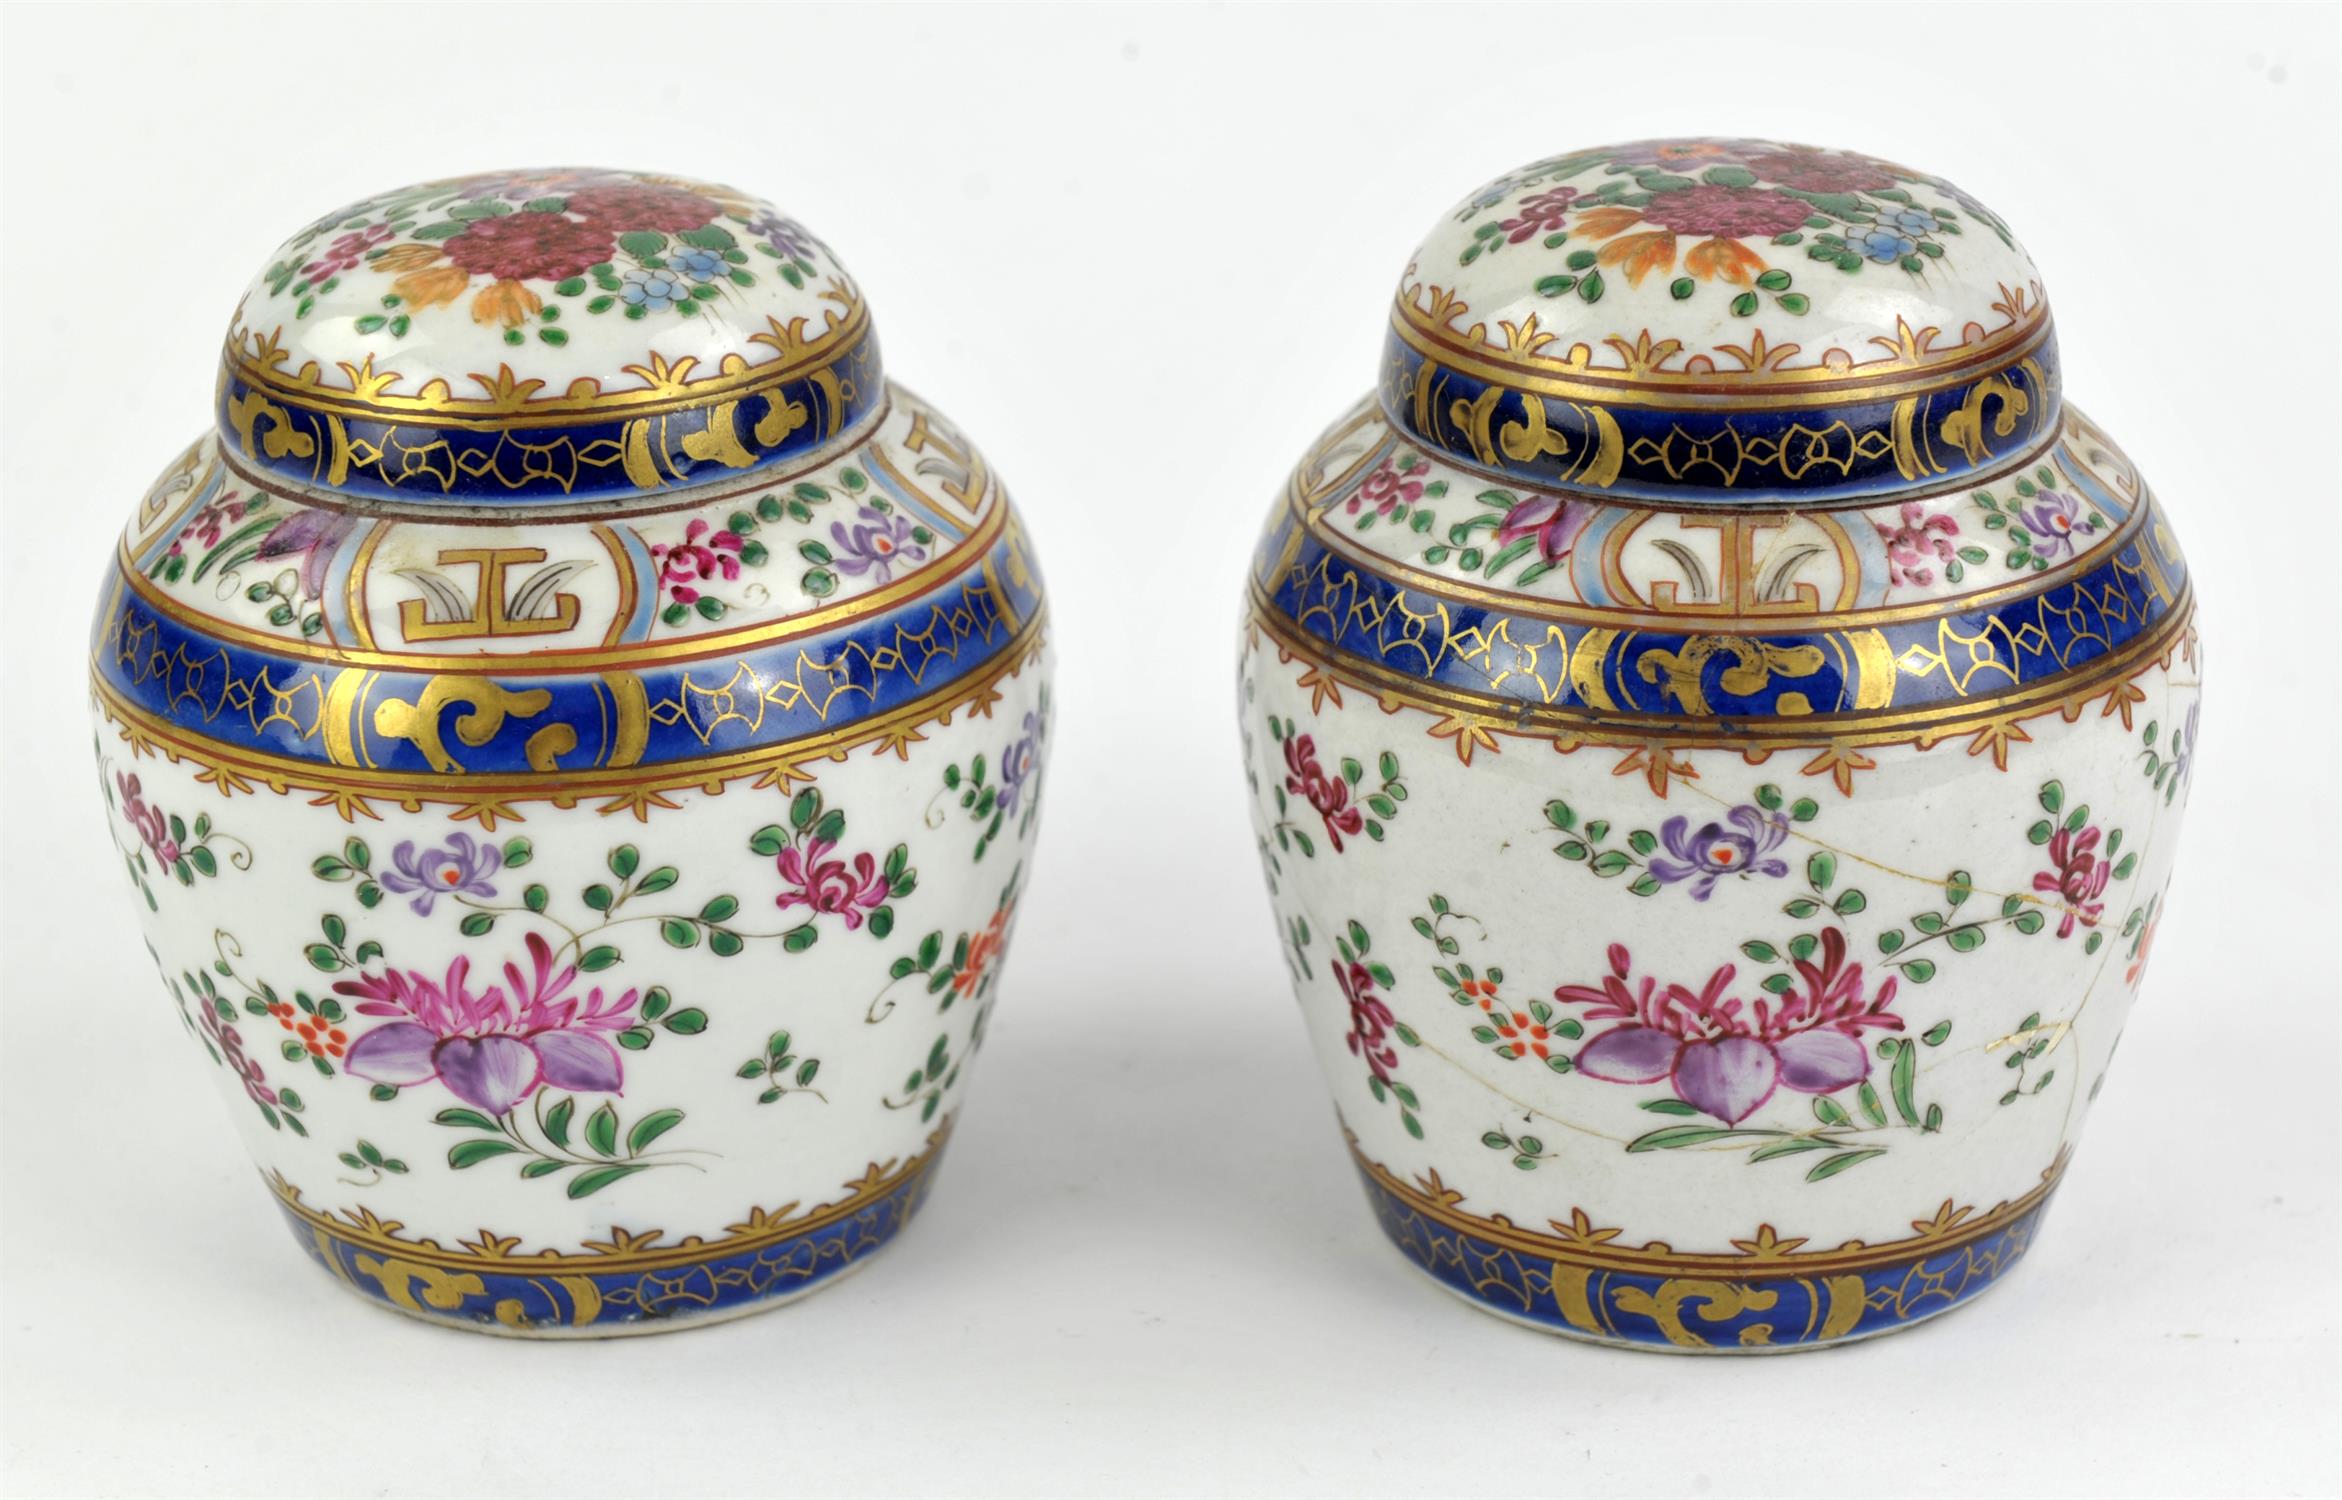 Eight famille rose dishes; each one decorated with floral designs and about 22.5 cm diameter, - Image 19 of 28